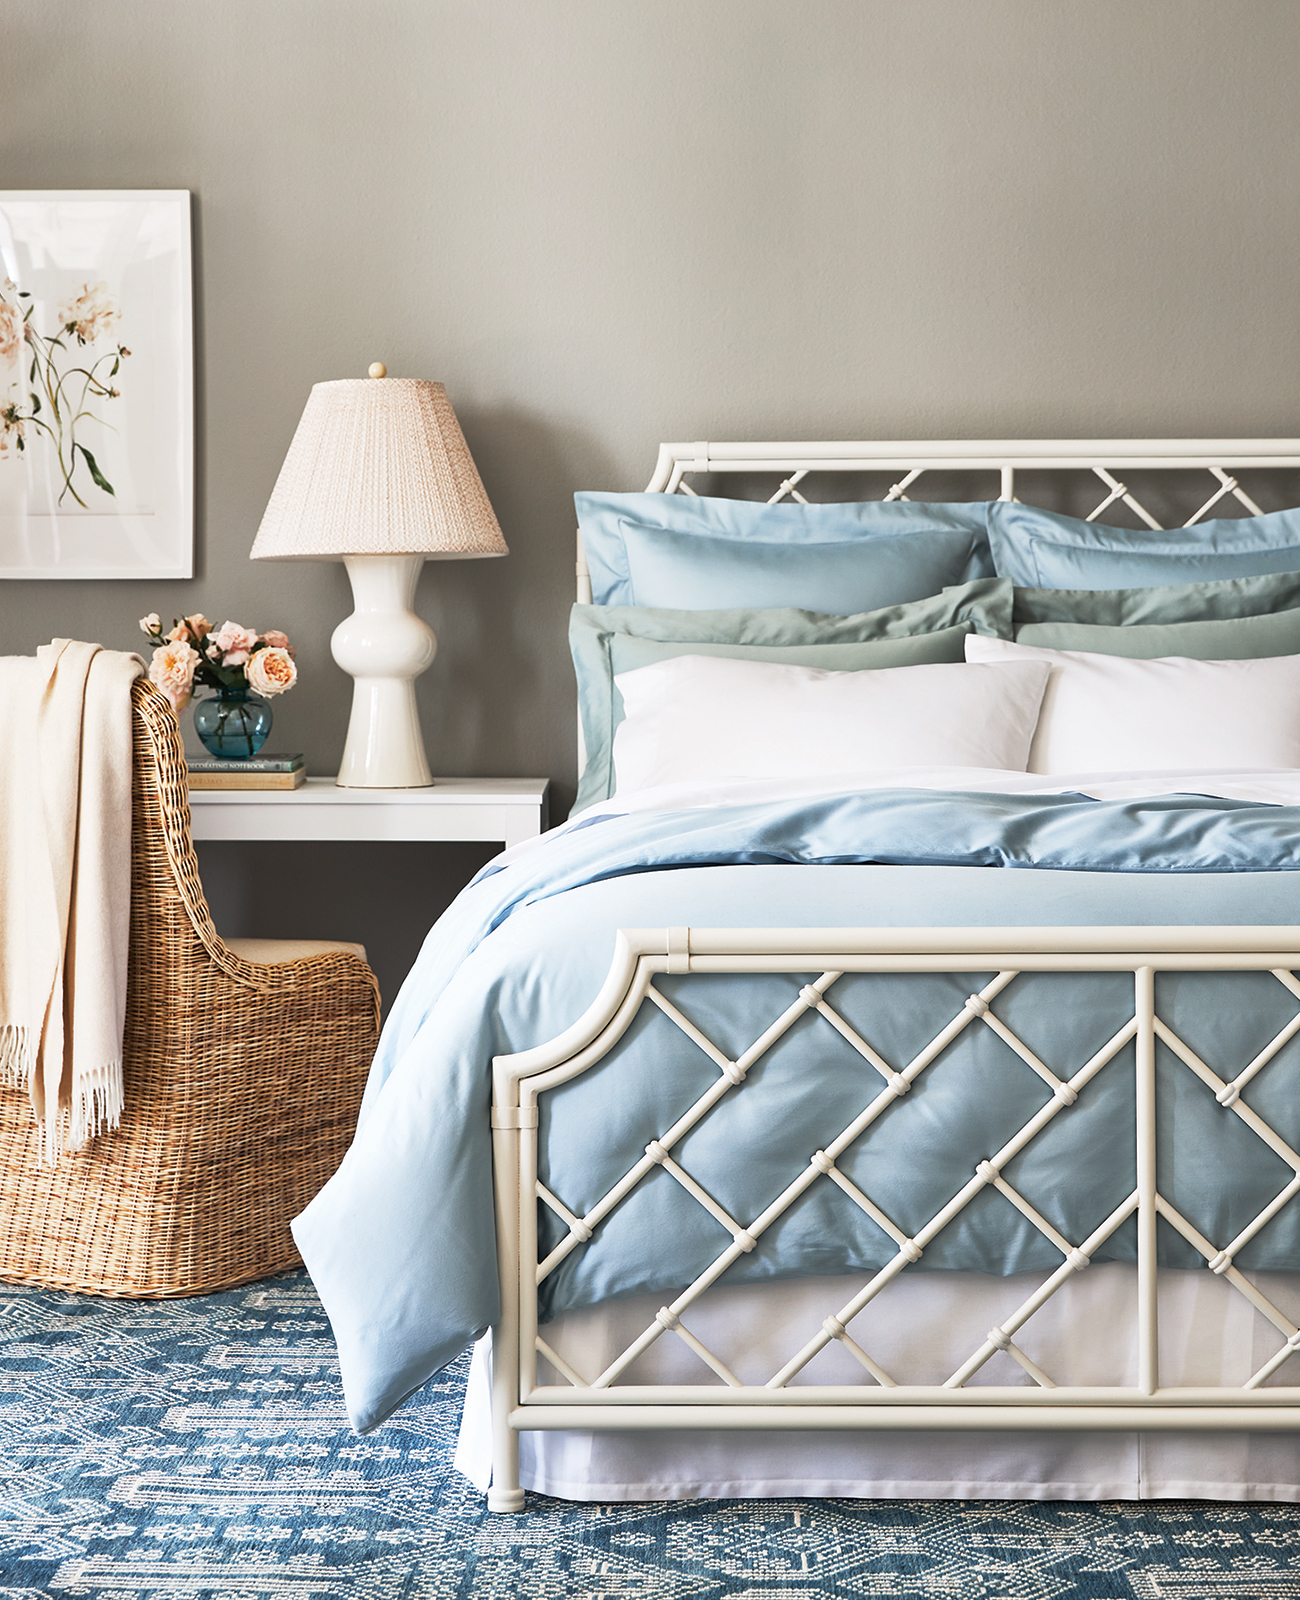 Blue-and-white bedroom set with lattice-back bed